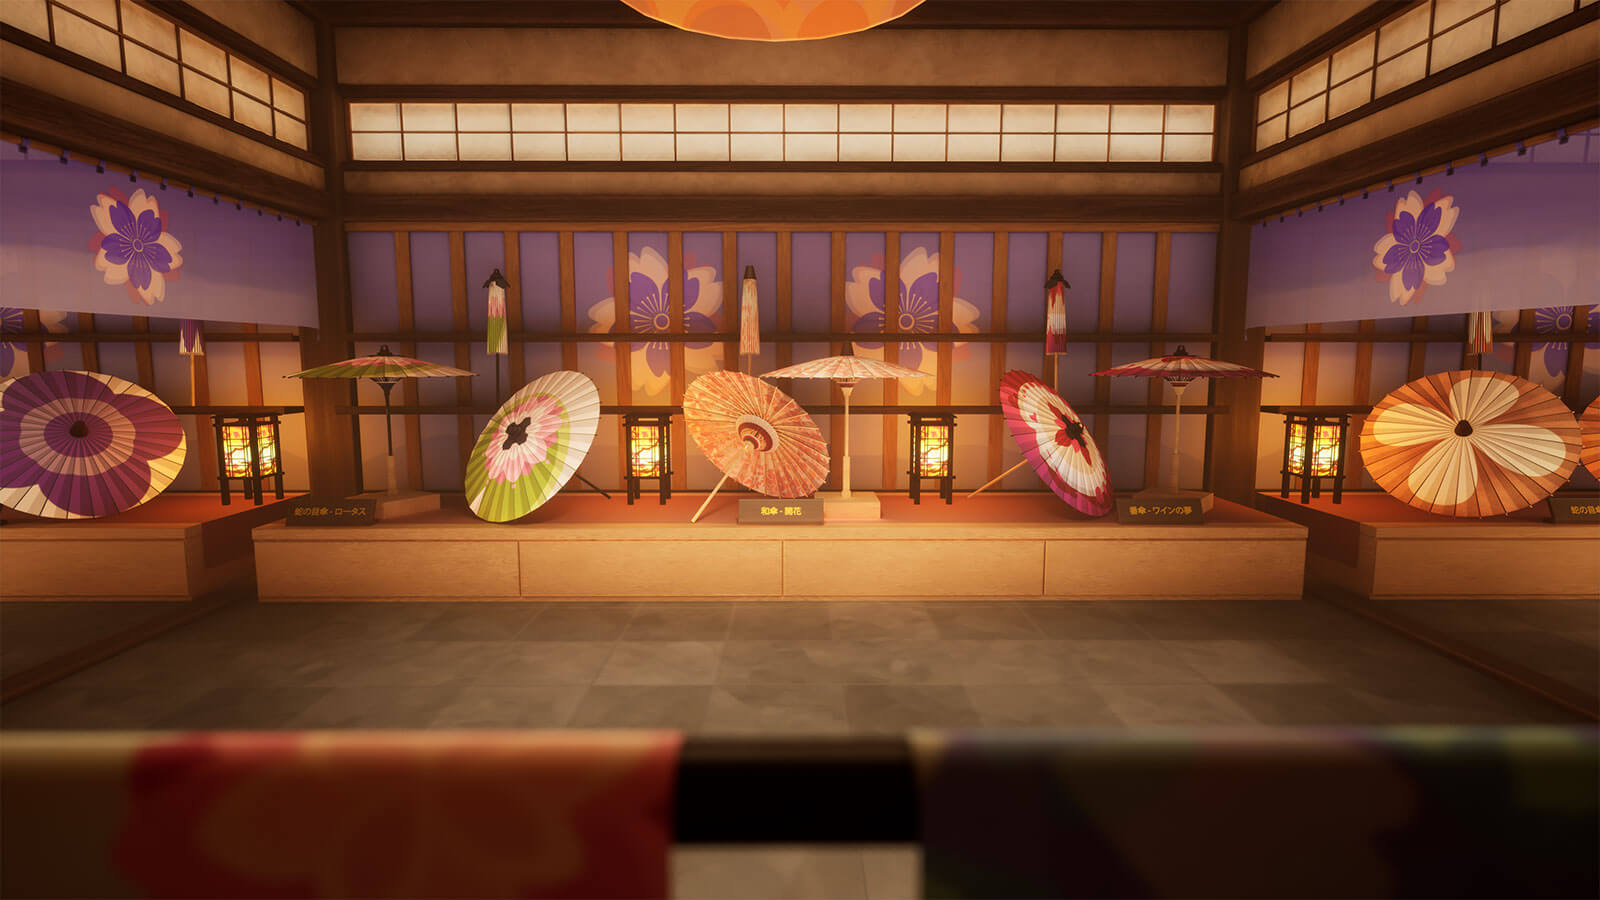 Vibrant Japanese umbrellas decorate a small stage with small laterns in between